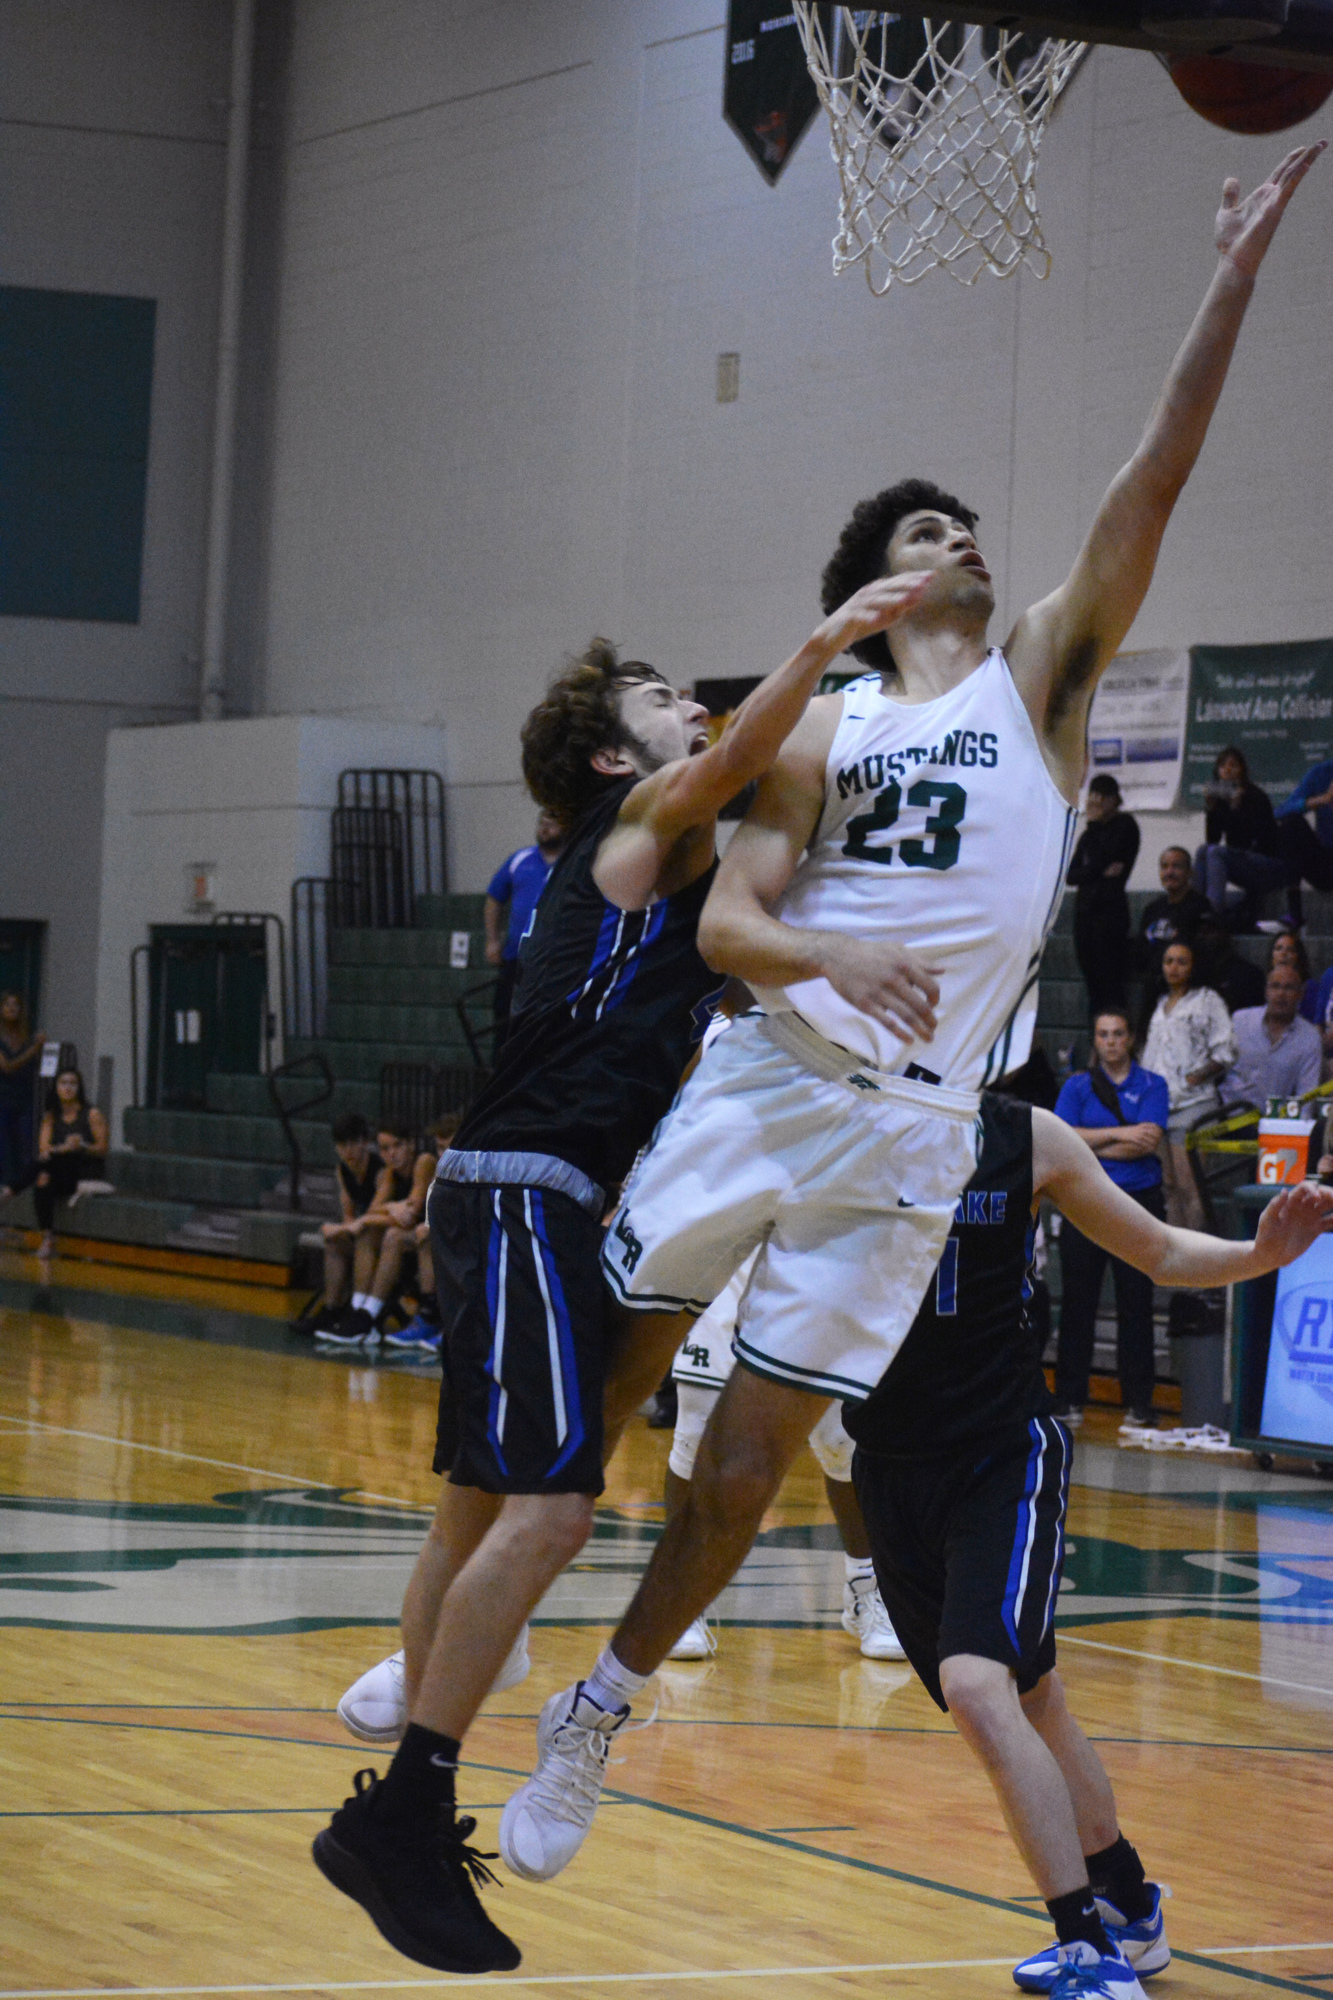 Lakewood Ranch High junior guard Christian Shaneyfelt hits a layup. He finished with a team-high 23 points.